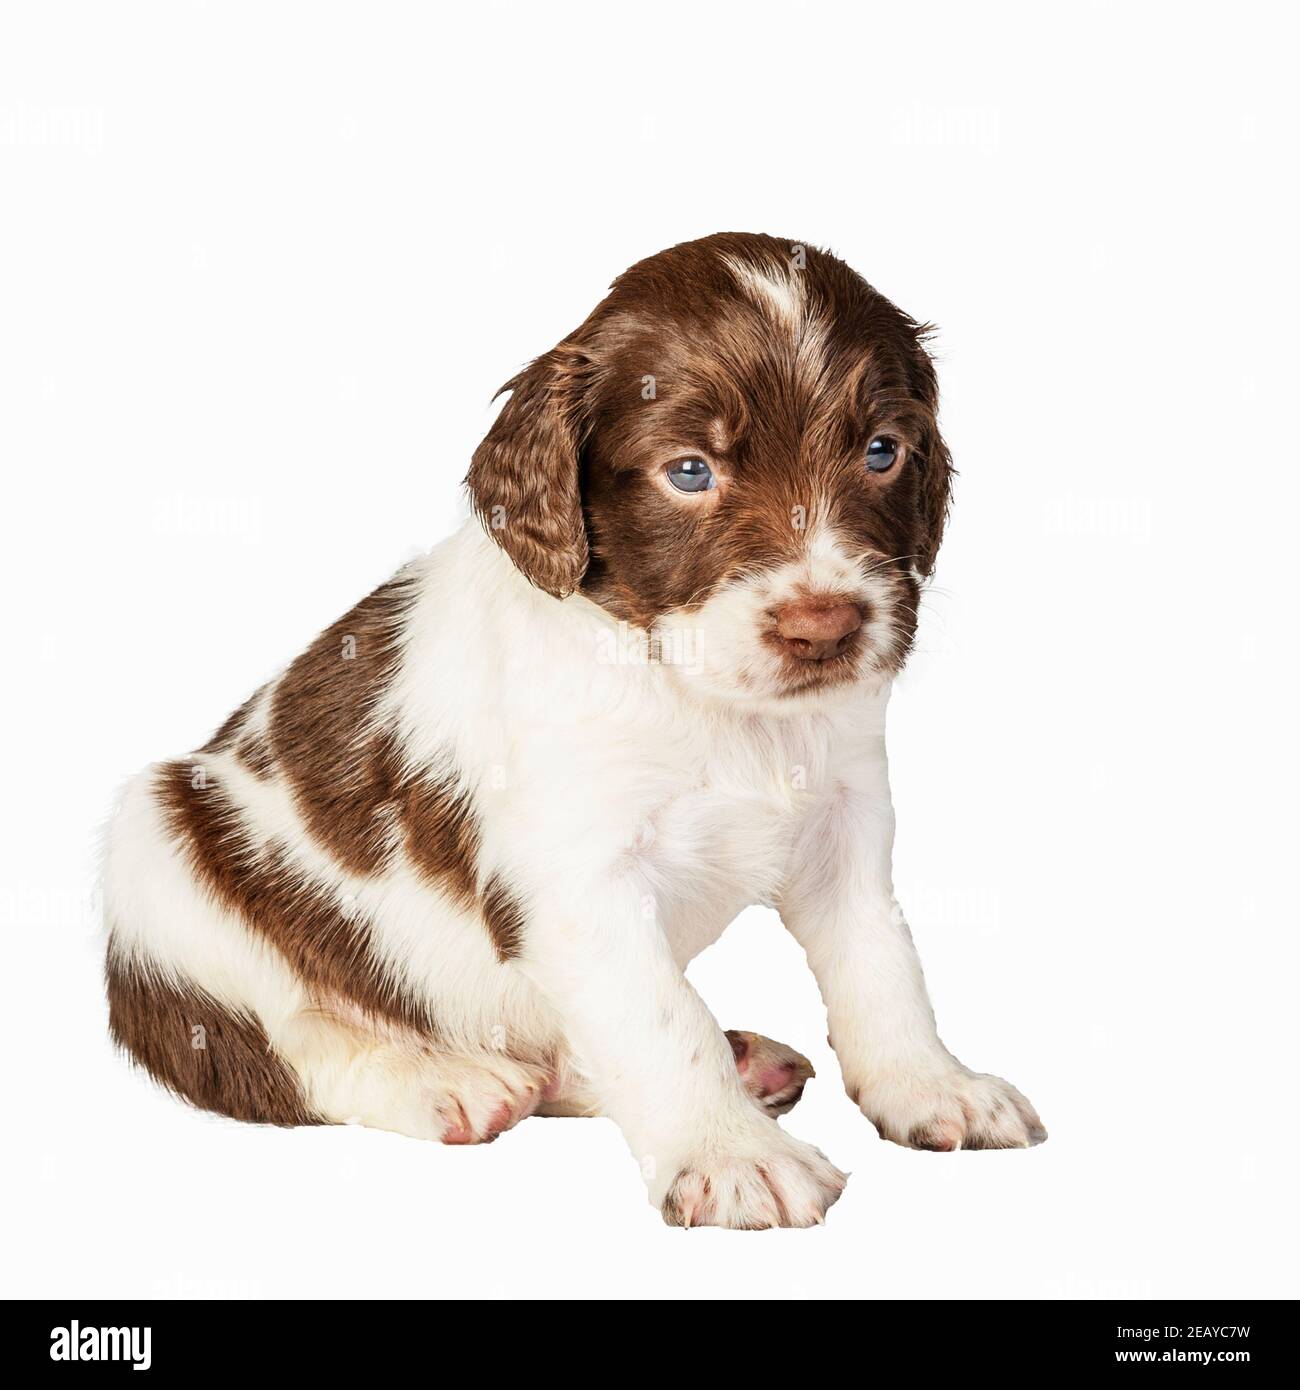 A 4 week old liver and white English Springer Spaniel puppy Stock Photo